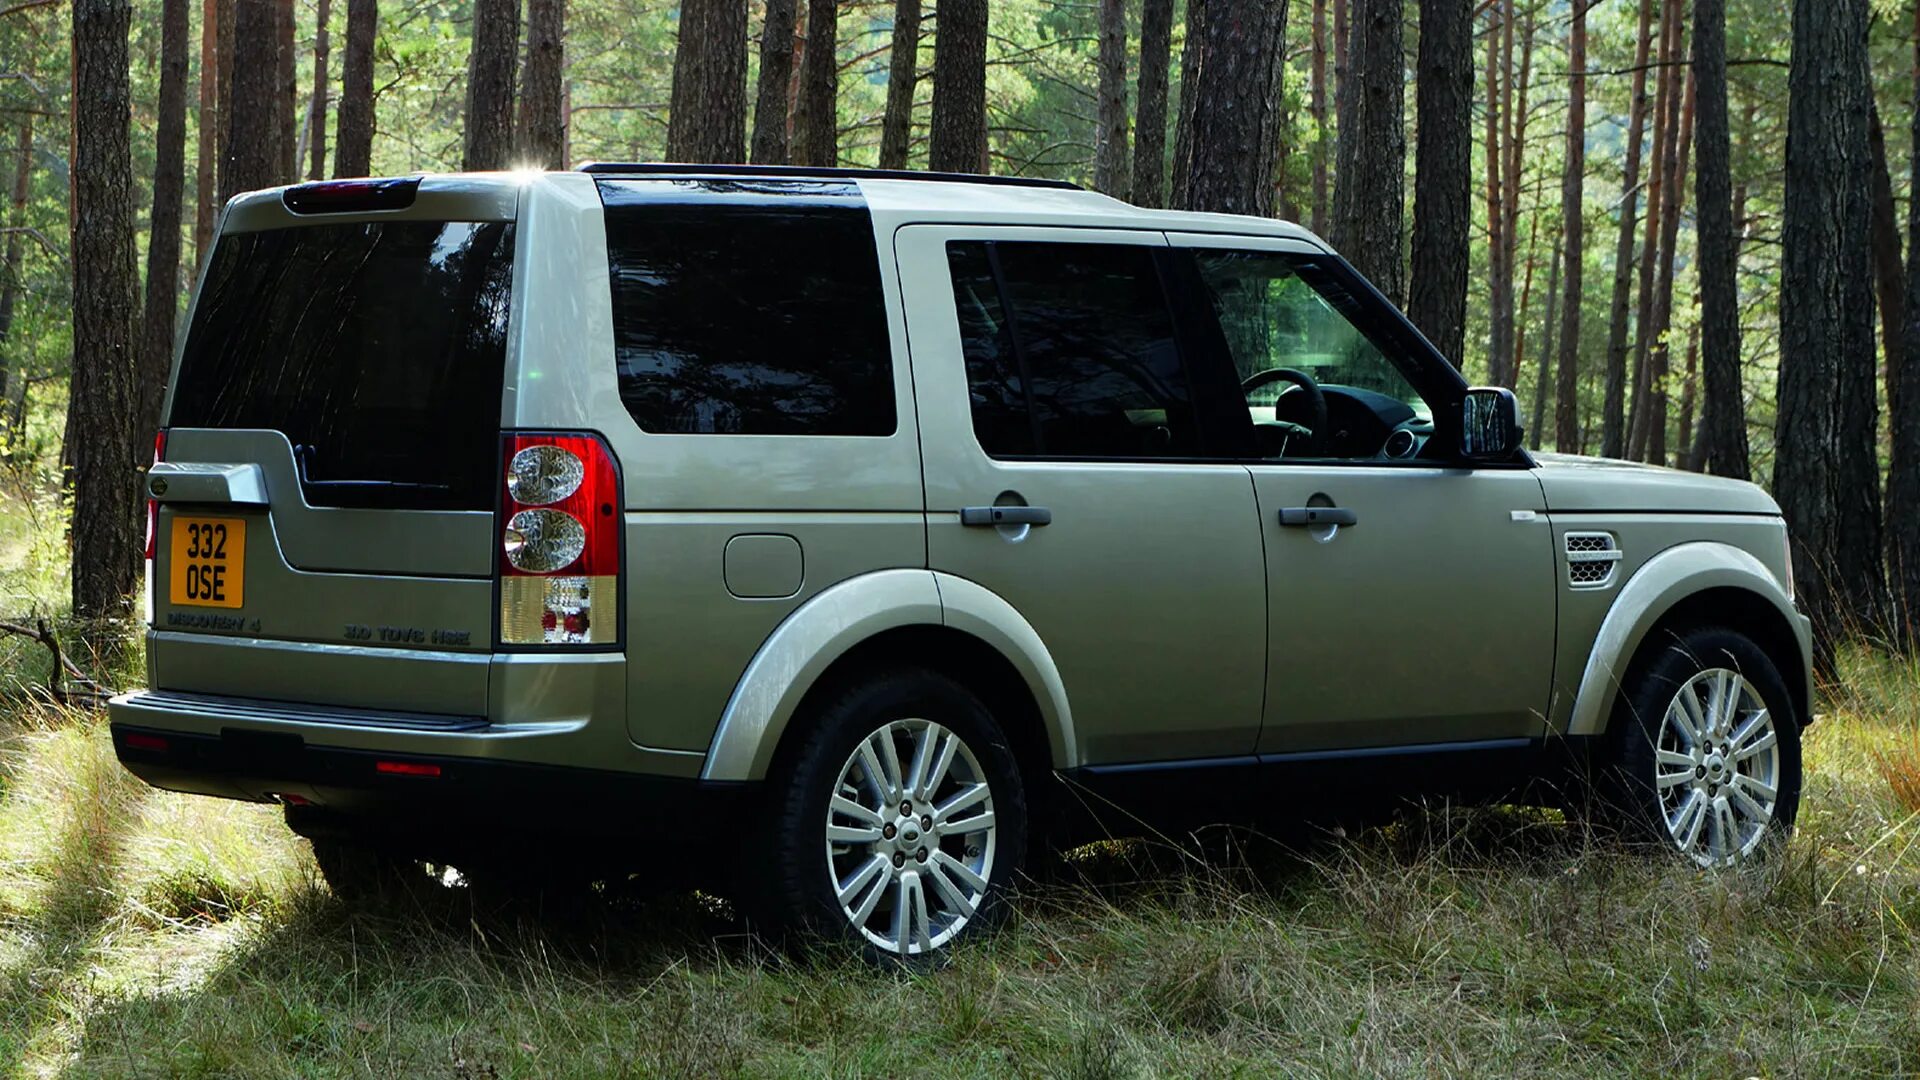 Land Rover Discovery 4. Ленд Ровер Дискавери 4 2009. Лэнд ровыер Дискавери 4. Ленд Ровер Дискавери 4 2014. Дискавери 0